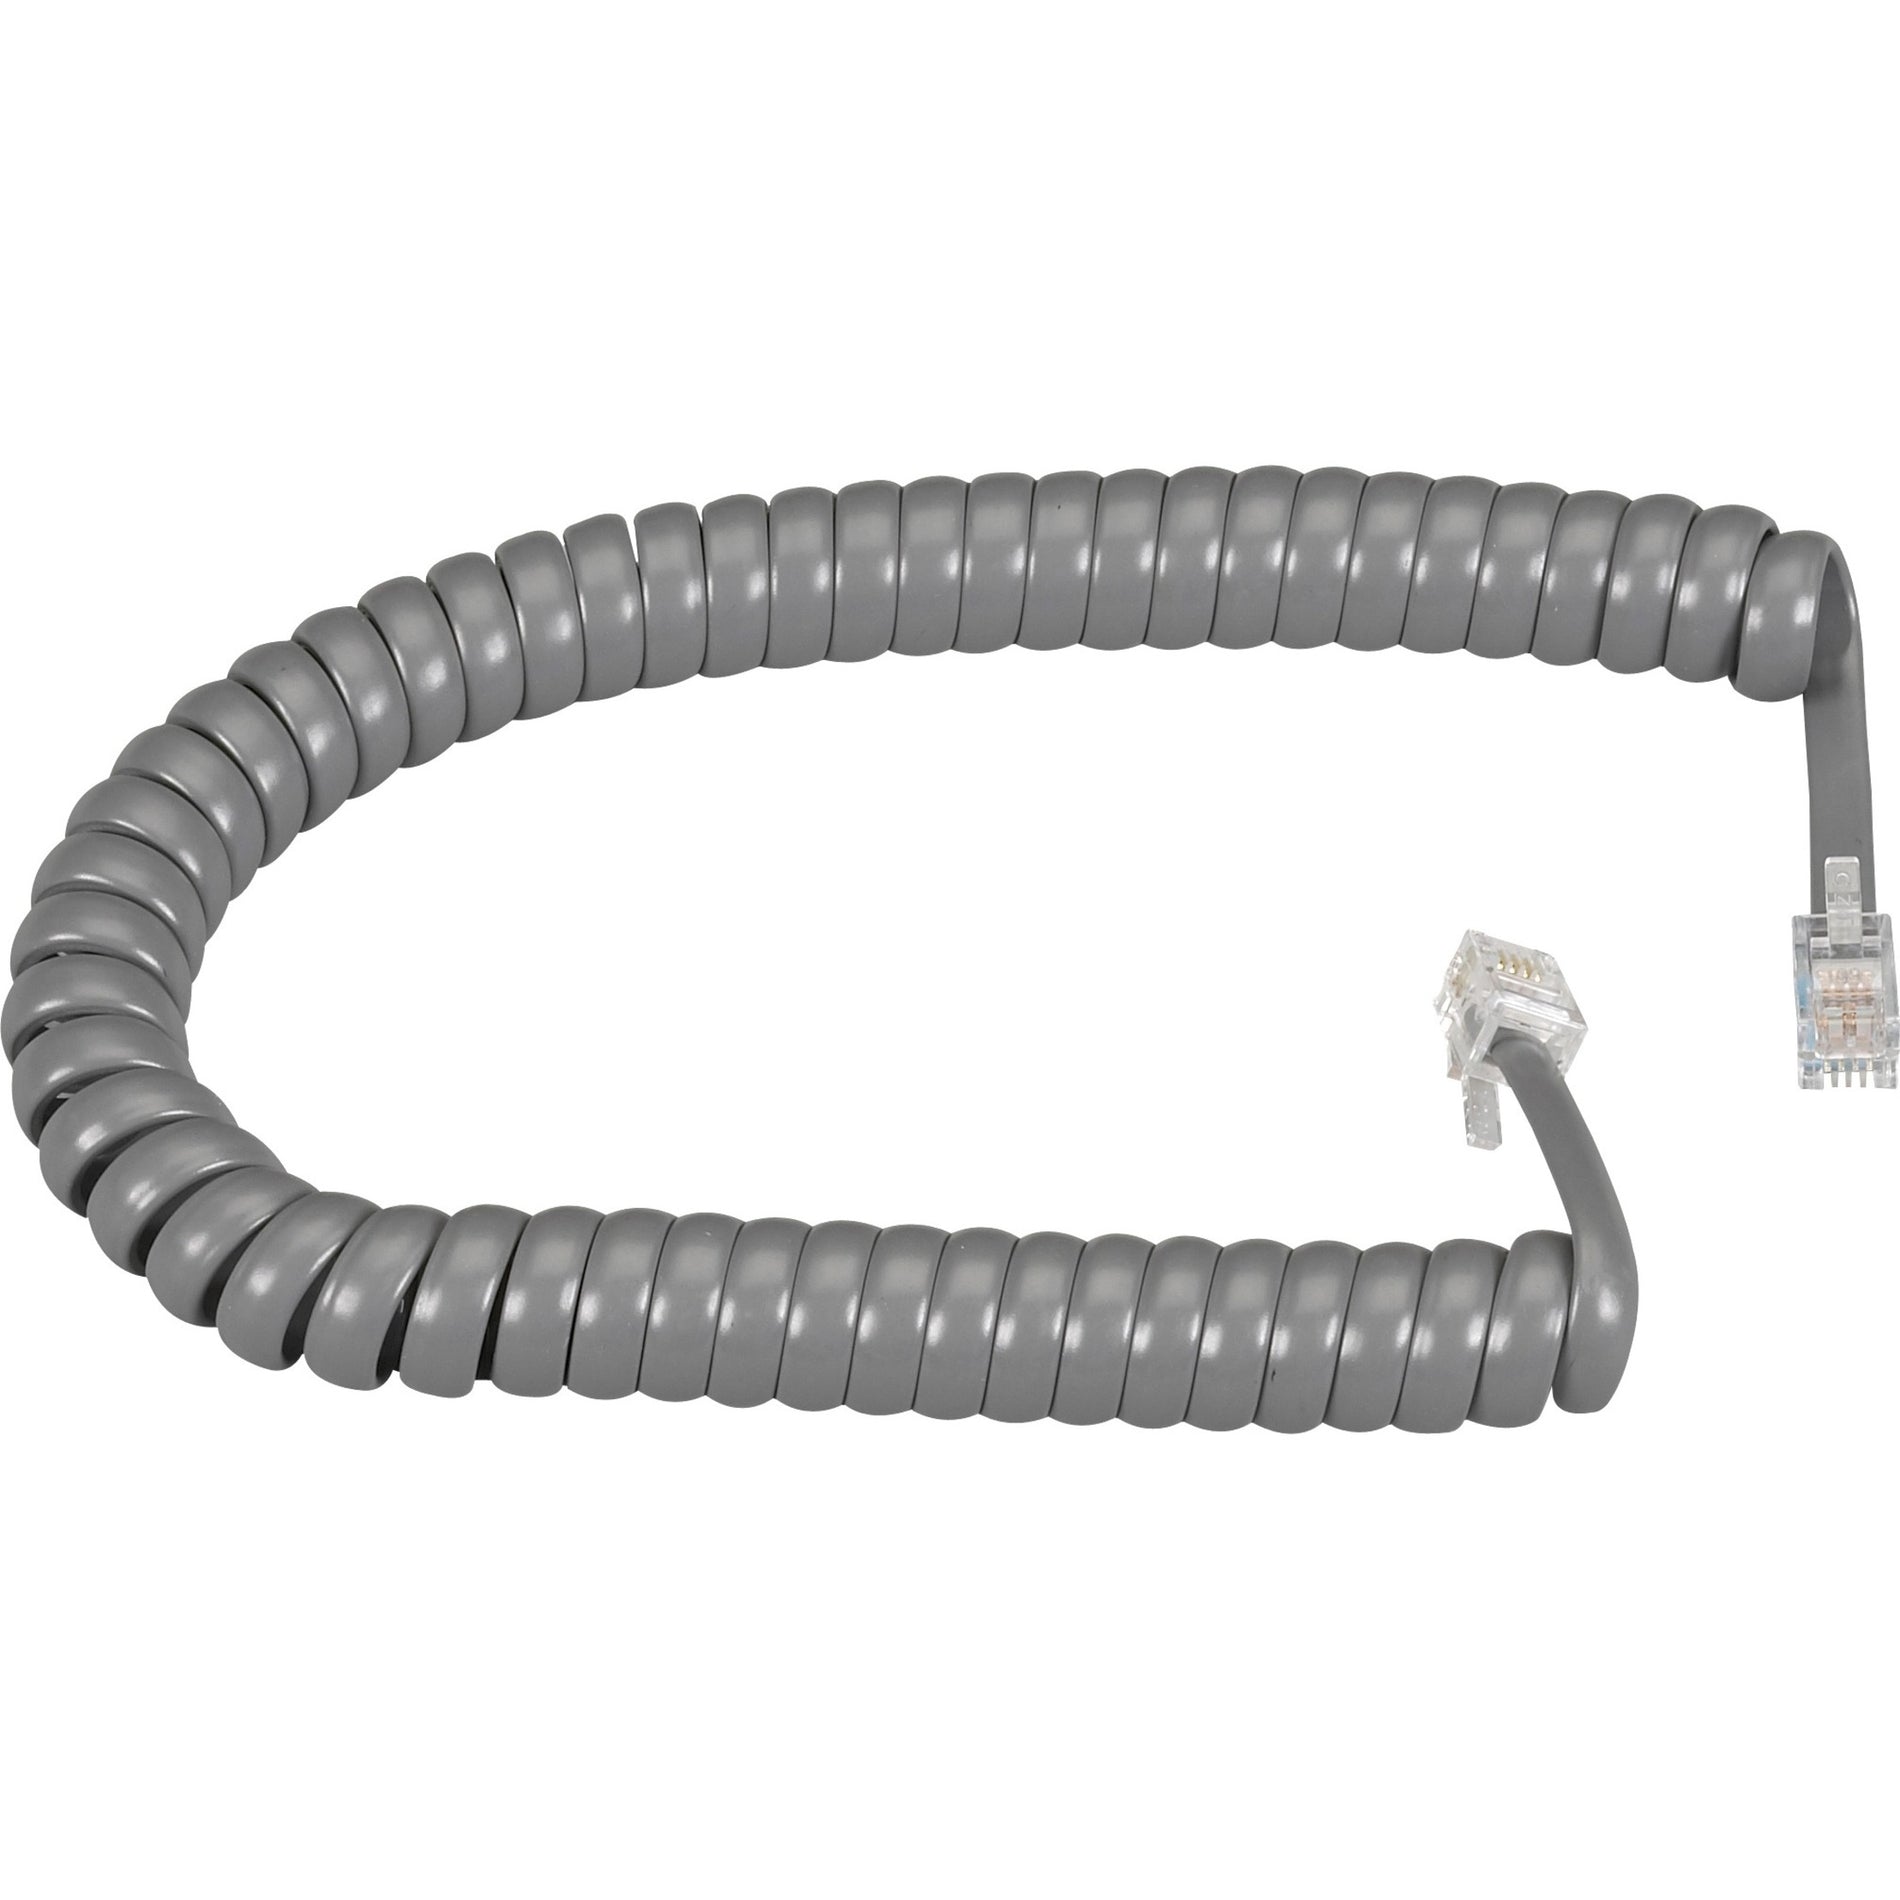 Black Box EJ302-0006 Modular Coiled Handset Cable, 6 ft, Gray